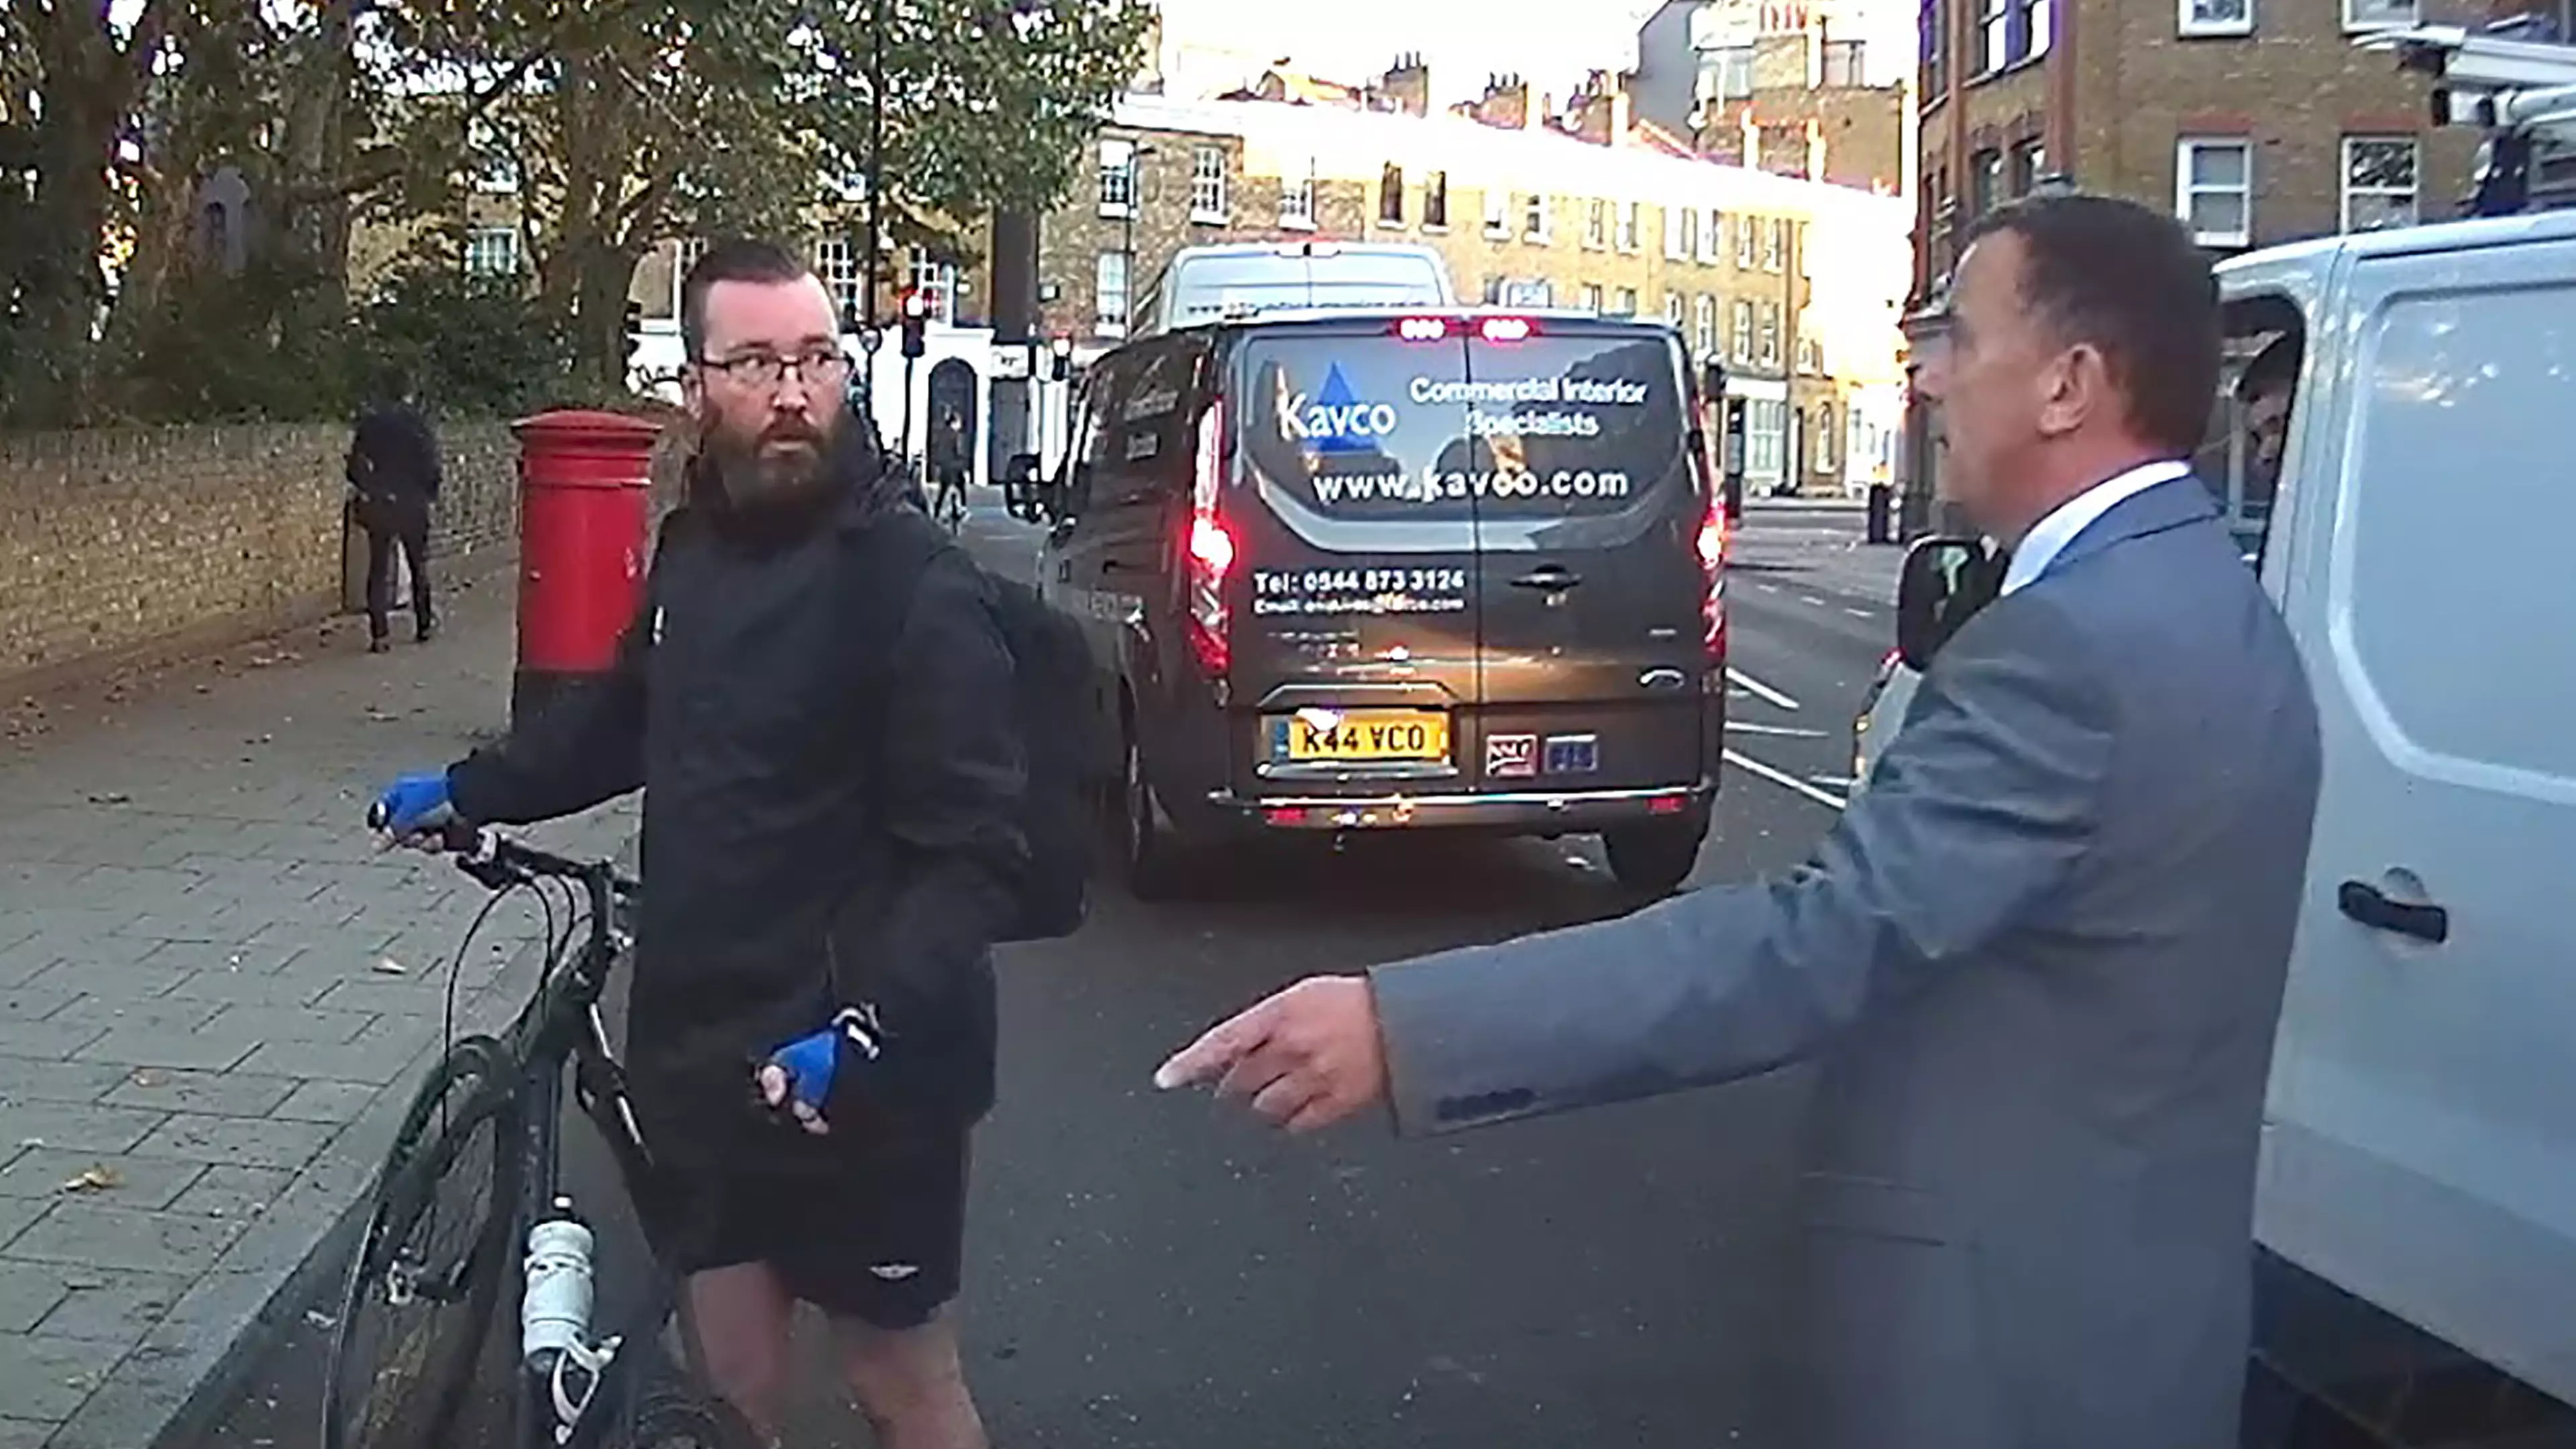 Angry Cyclist Slams Bike Into Mercedes Limousine In Road Rage Incident